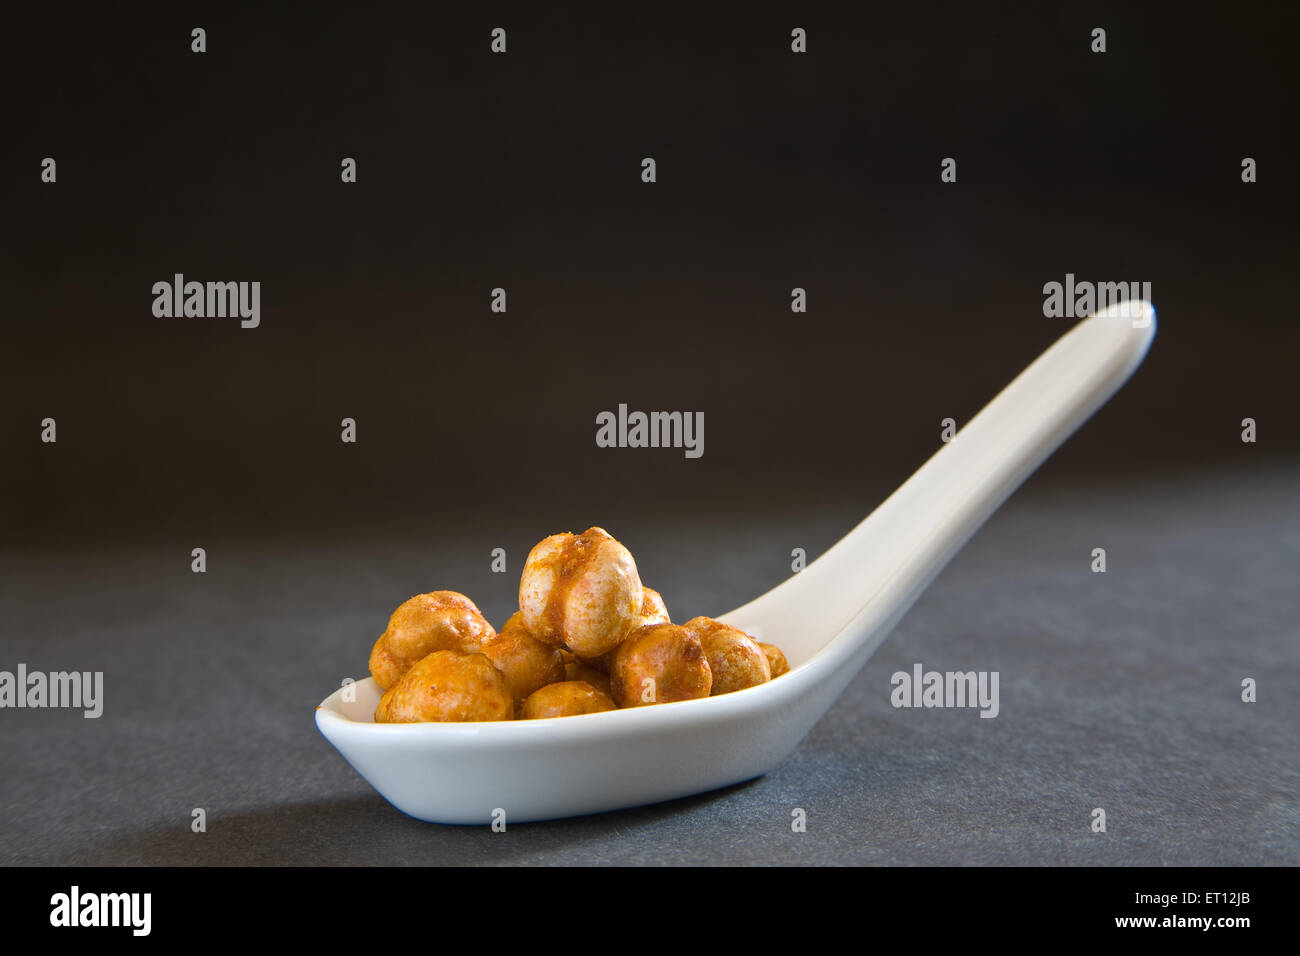 Indian breakfast fry chickpeas chana masala served in spoon on black background 12 May 2010 Stock Photo